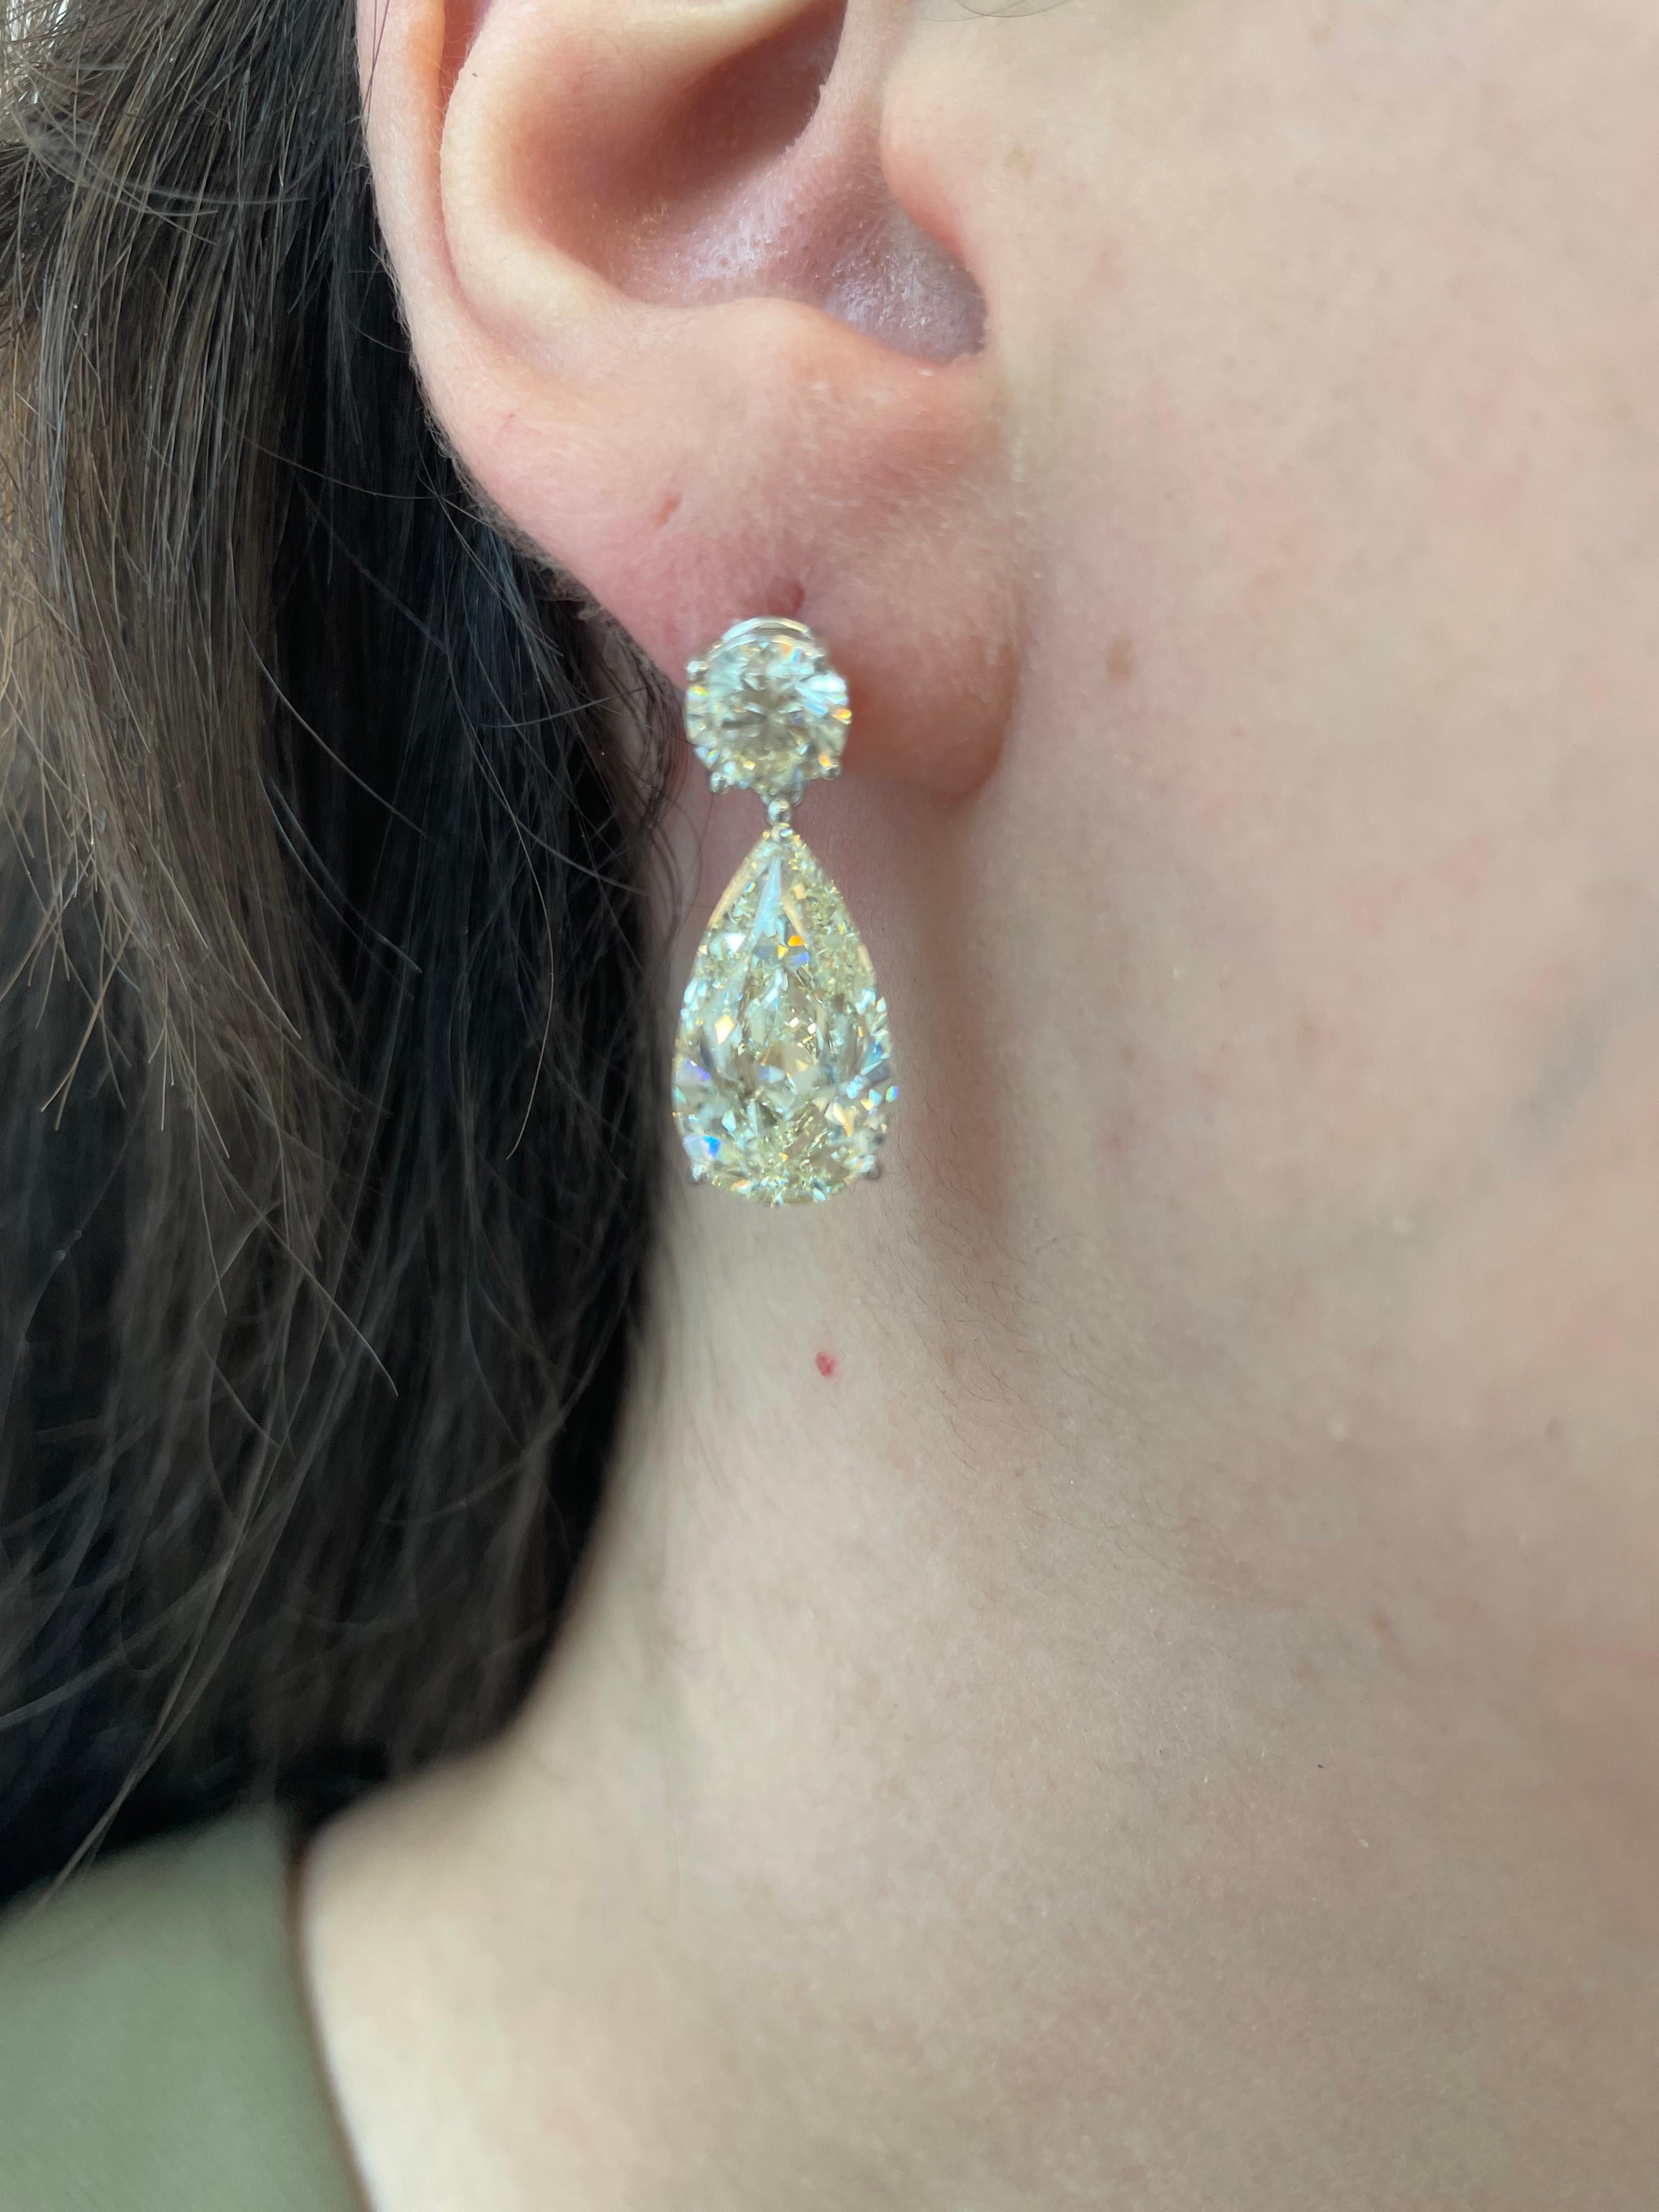 Classic diamond stud drop earrings, each stone GIA certified. The bottom pear shape diamonds are detachable, high jewelry by Alexander Beverly Hills.
12.49 carats total diamond weight.
Two matching pear shape diamonds, 10.23 carats total. Both M